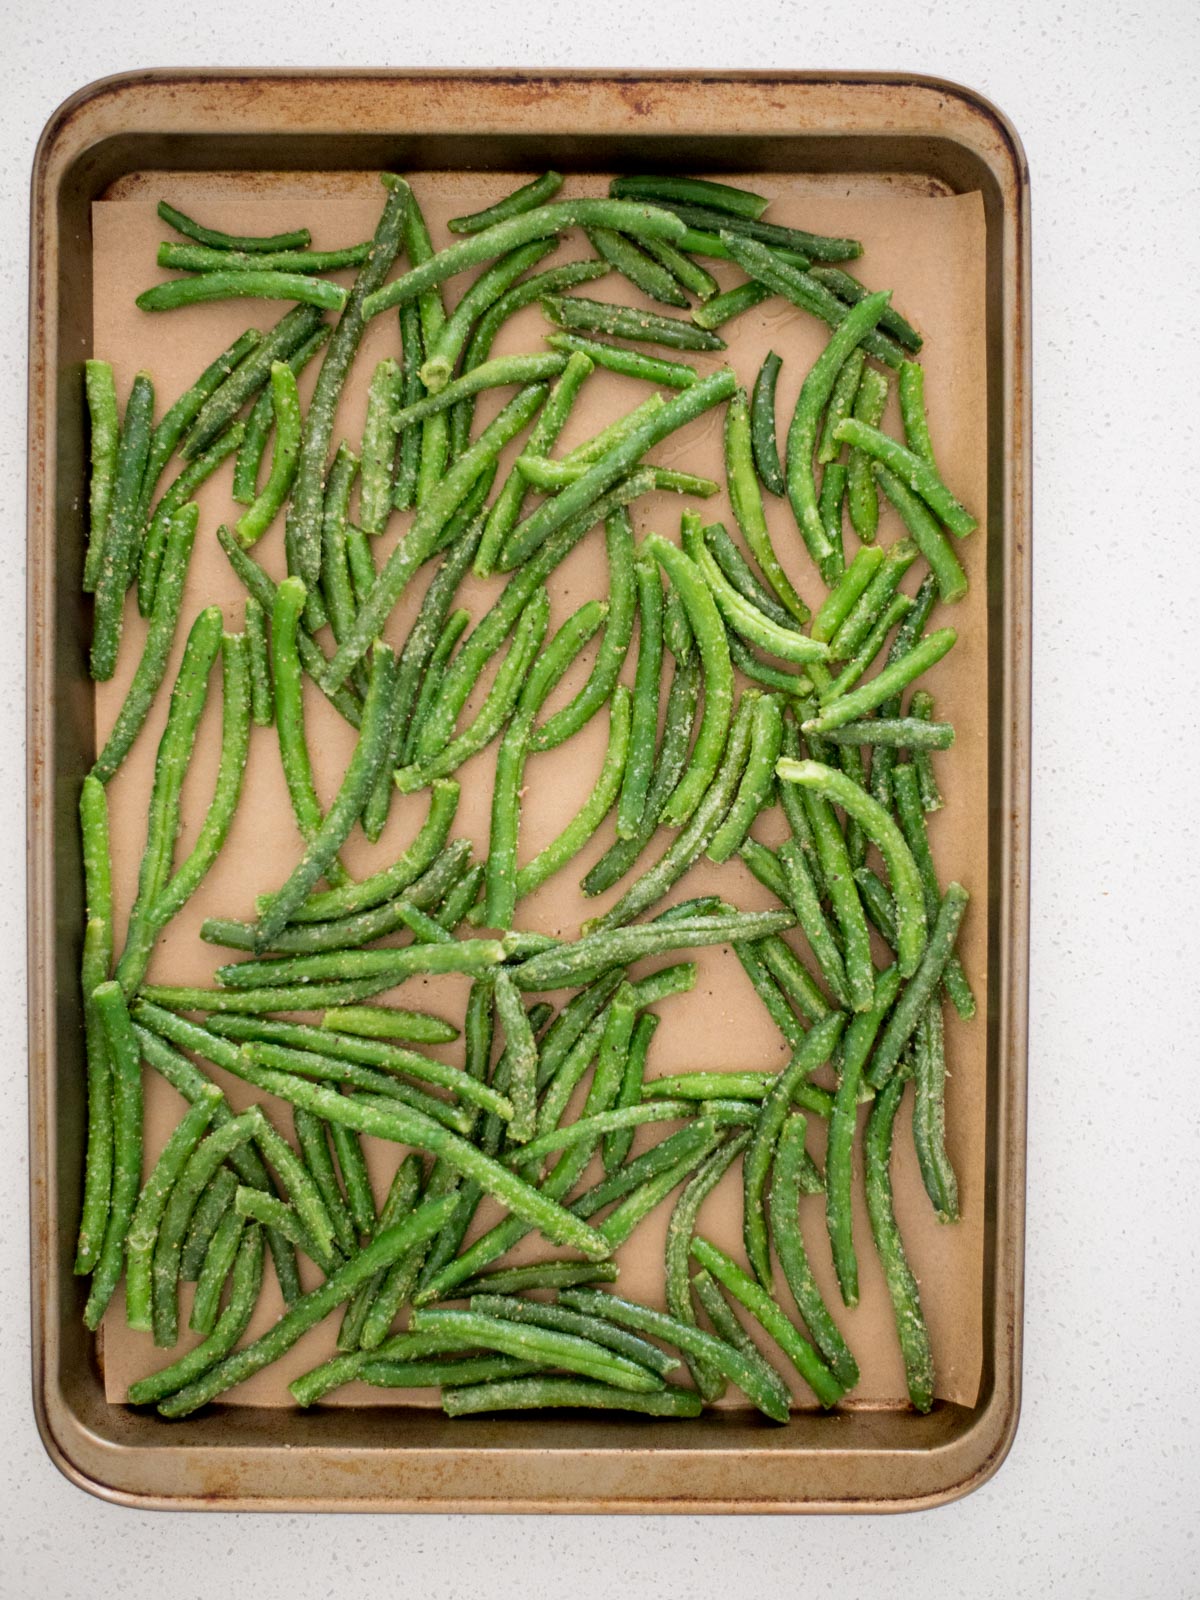 frozen green beans laying on parchment paper on a baking sheet.